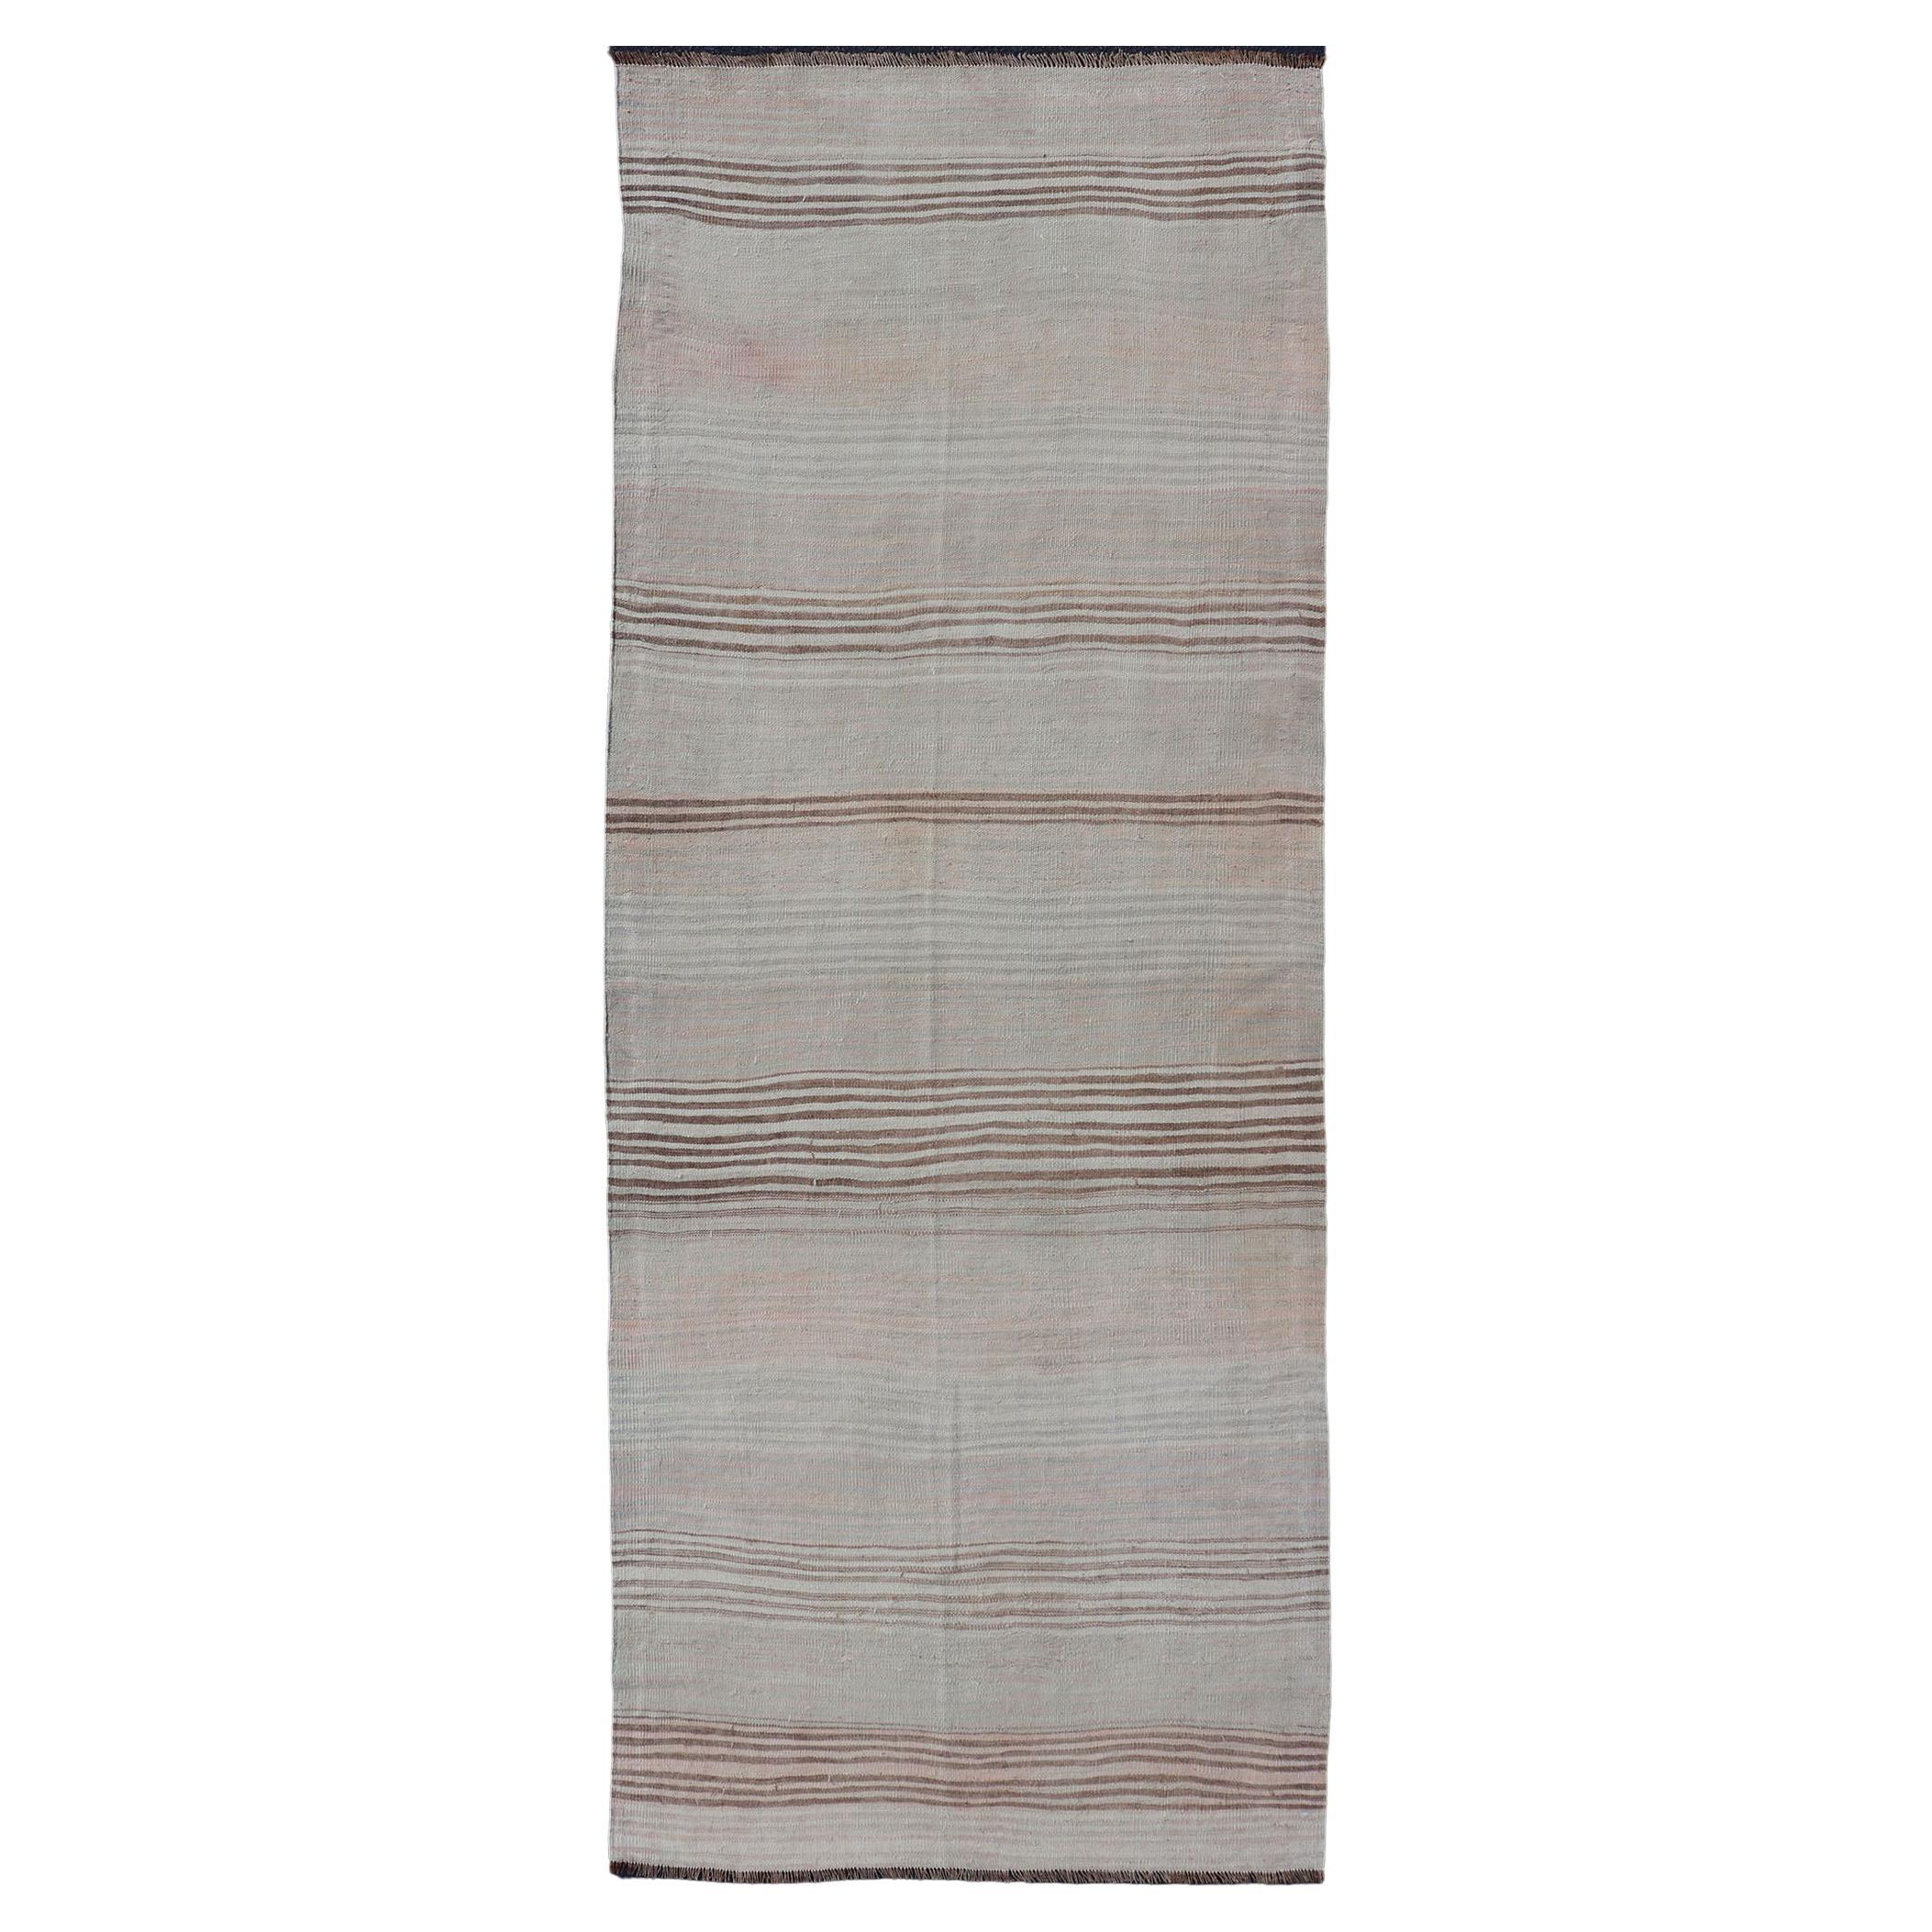 Vintage Turkish Kilim Runner with Stripes in Brown, Cream, Pink and Blue